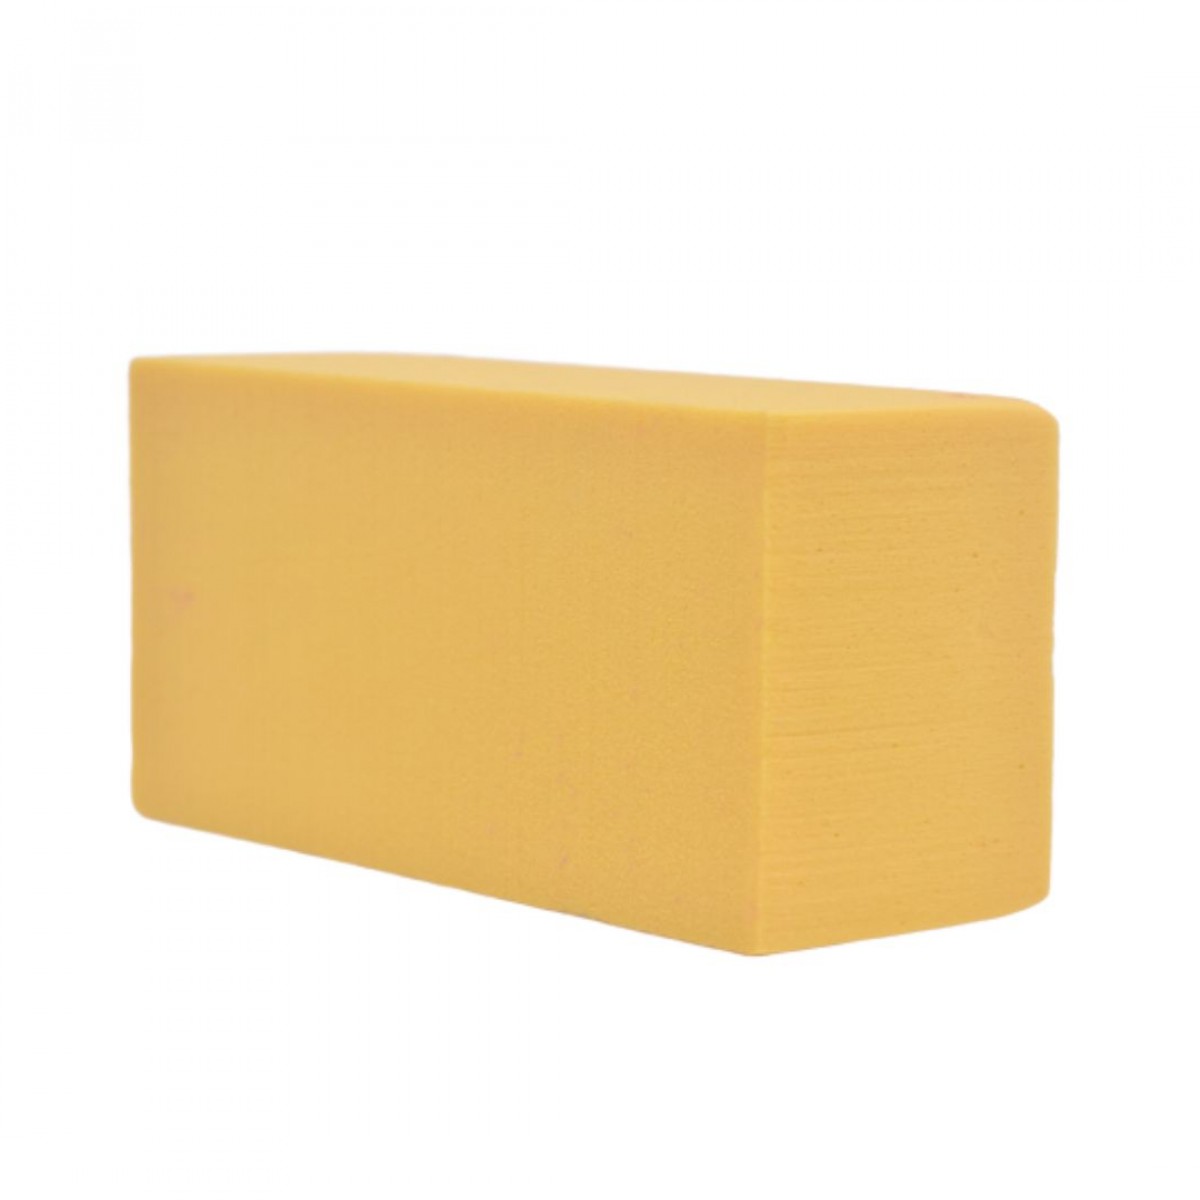 Sunny Yellow (1 No) - Colour Oasis Floral Foam